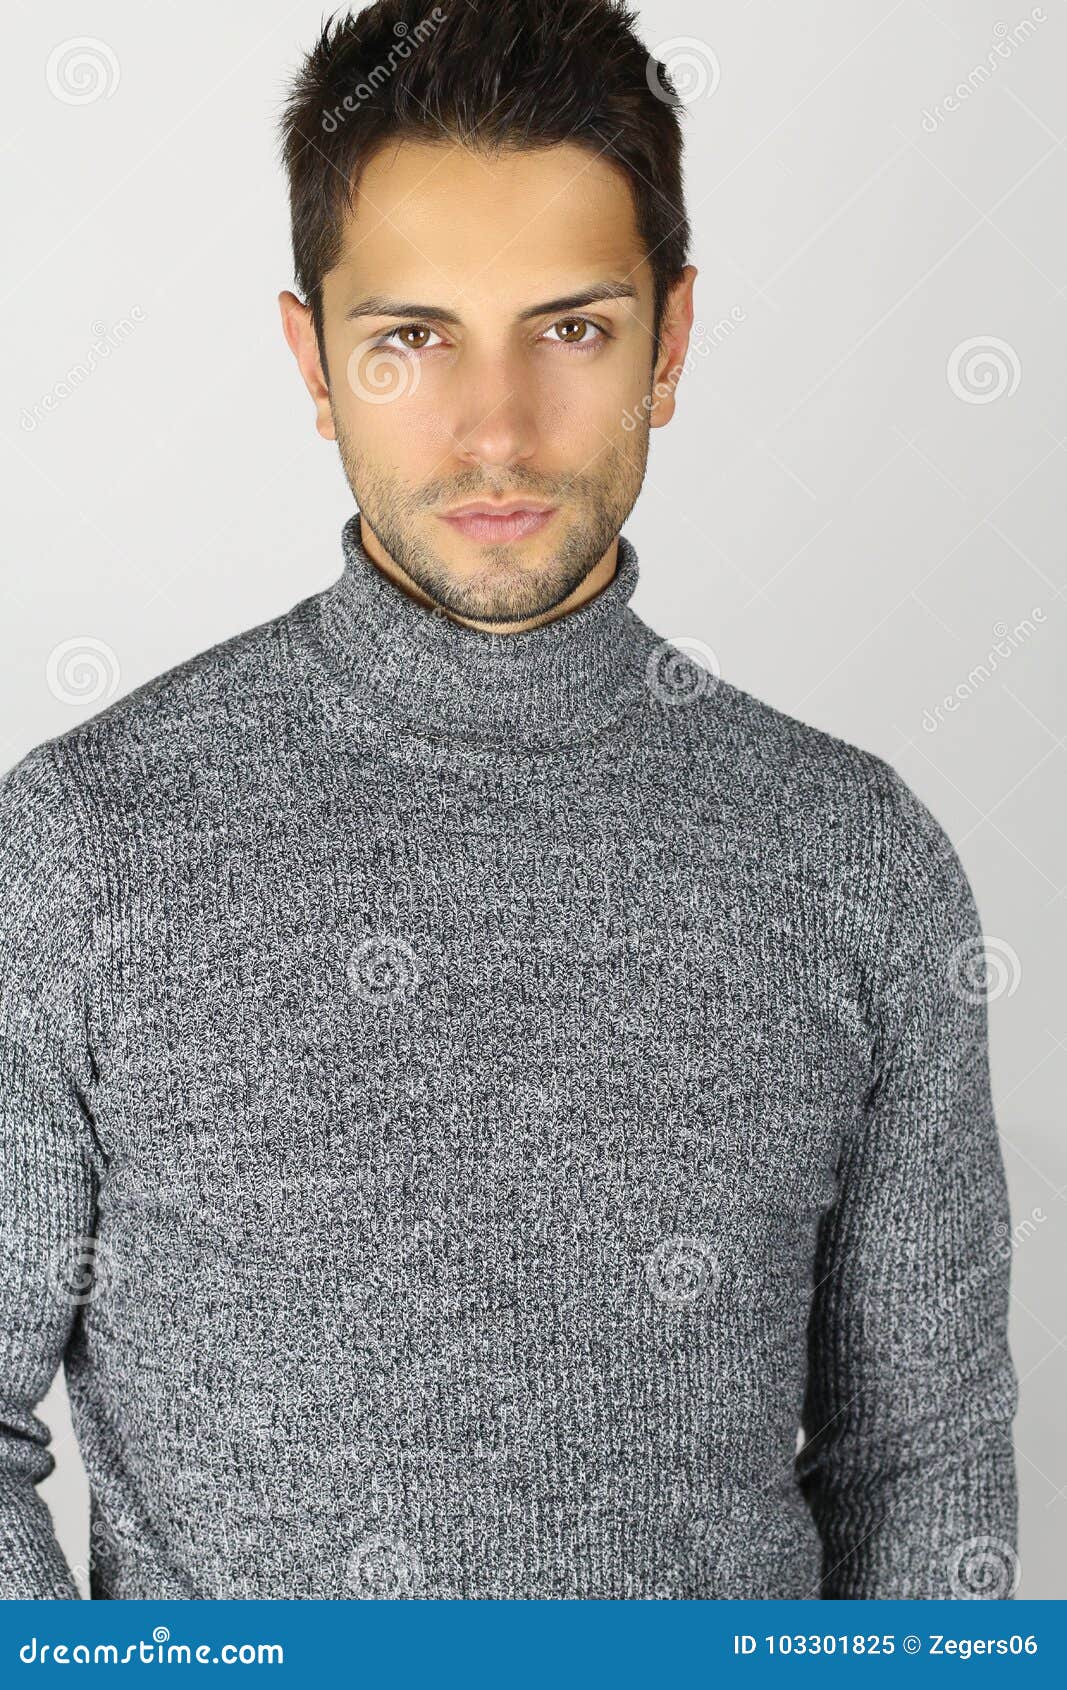 Handsome Man in a Gray Turtleneck Stock Image - Image of young ...